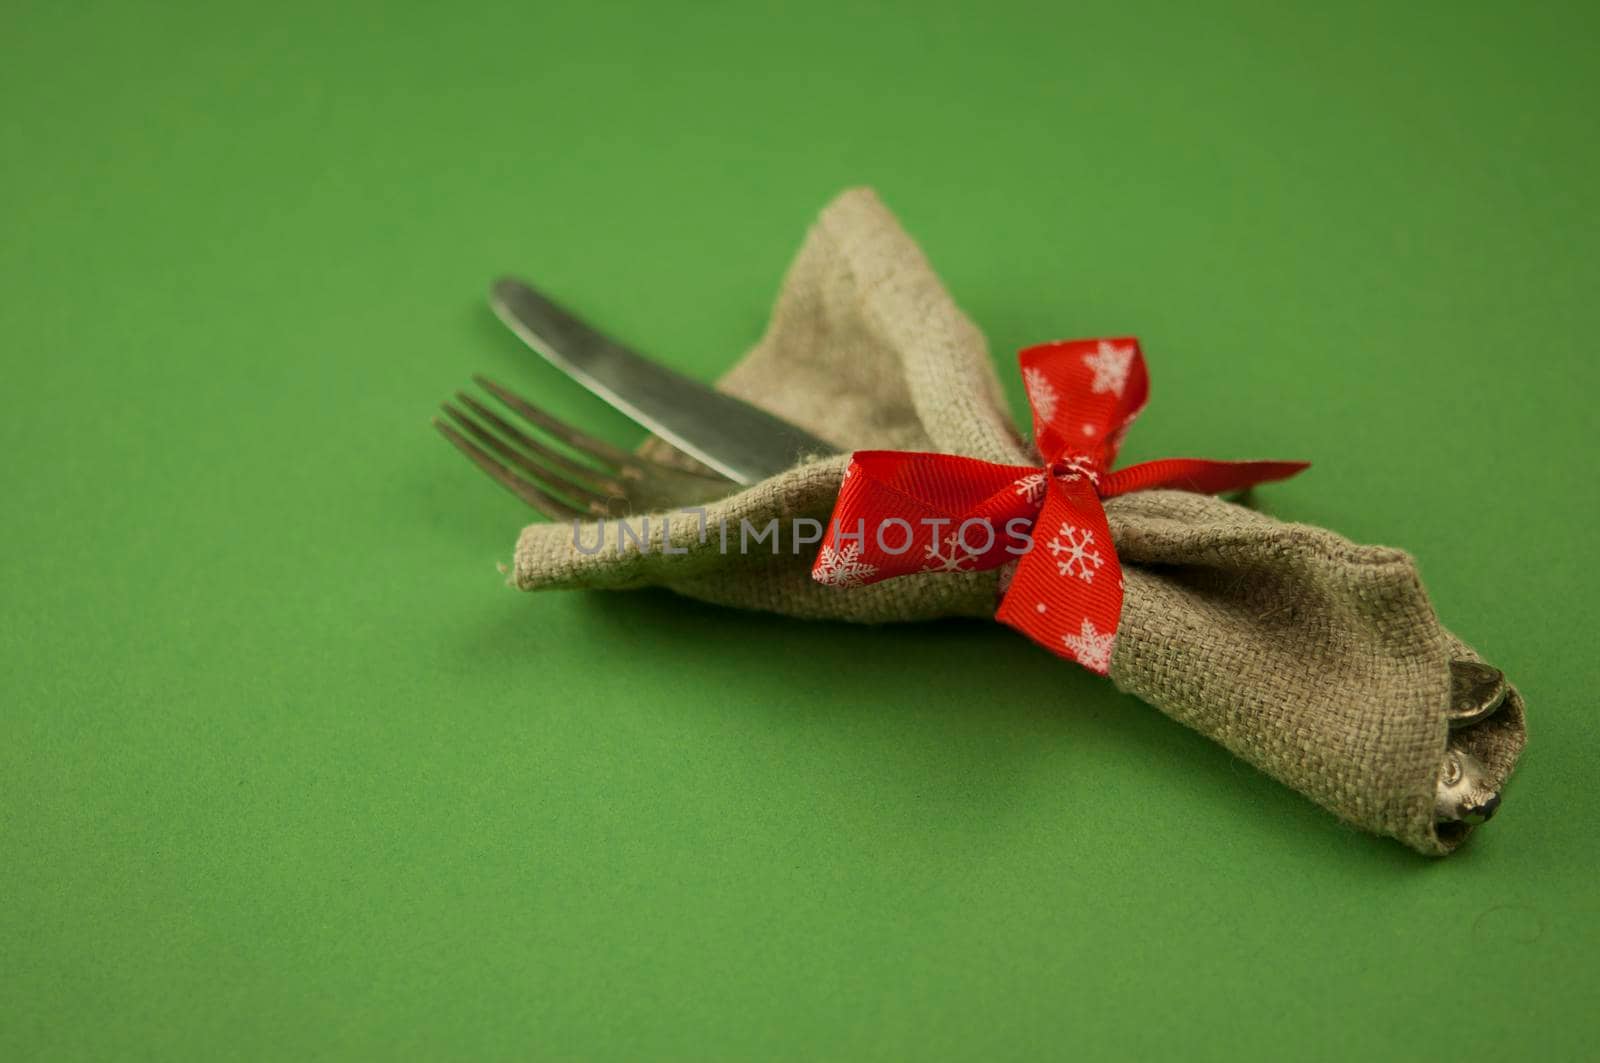 Vintage silverware decorated with red ribbon. Christmas menu. Copy space.